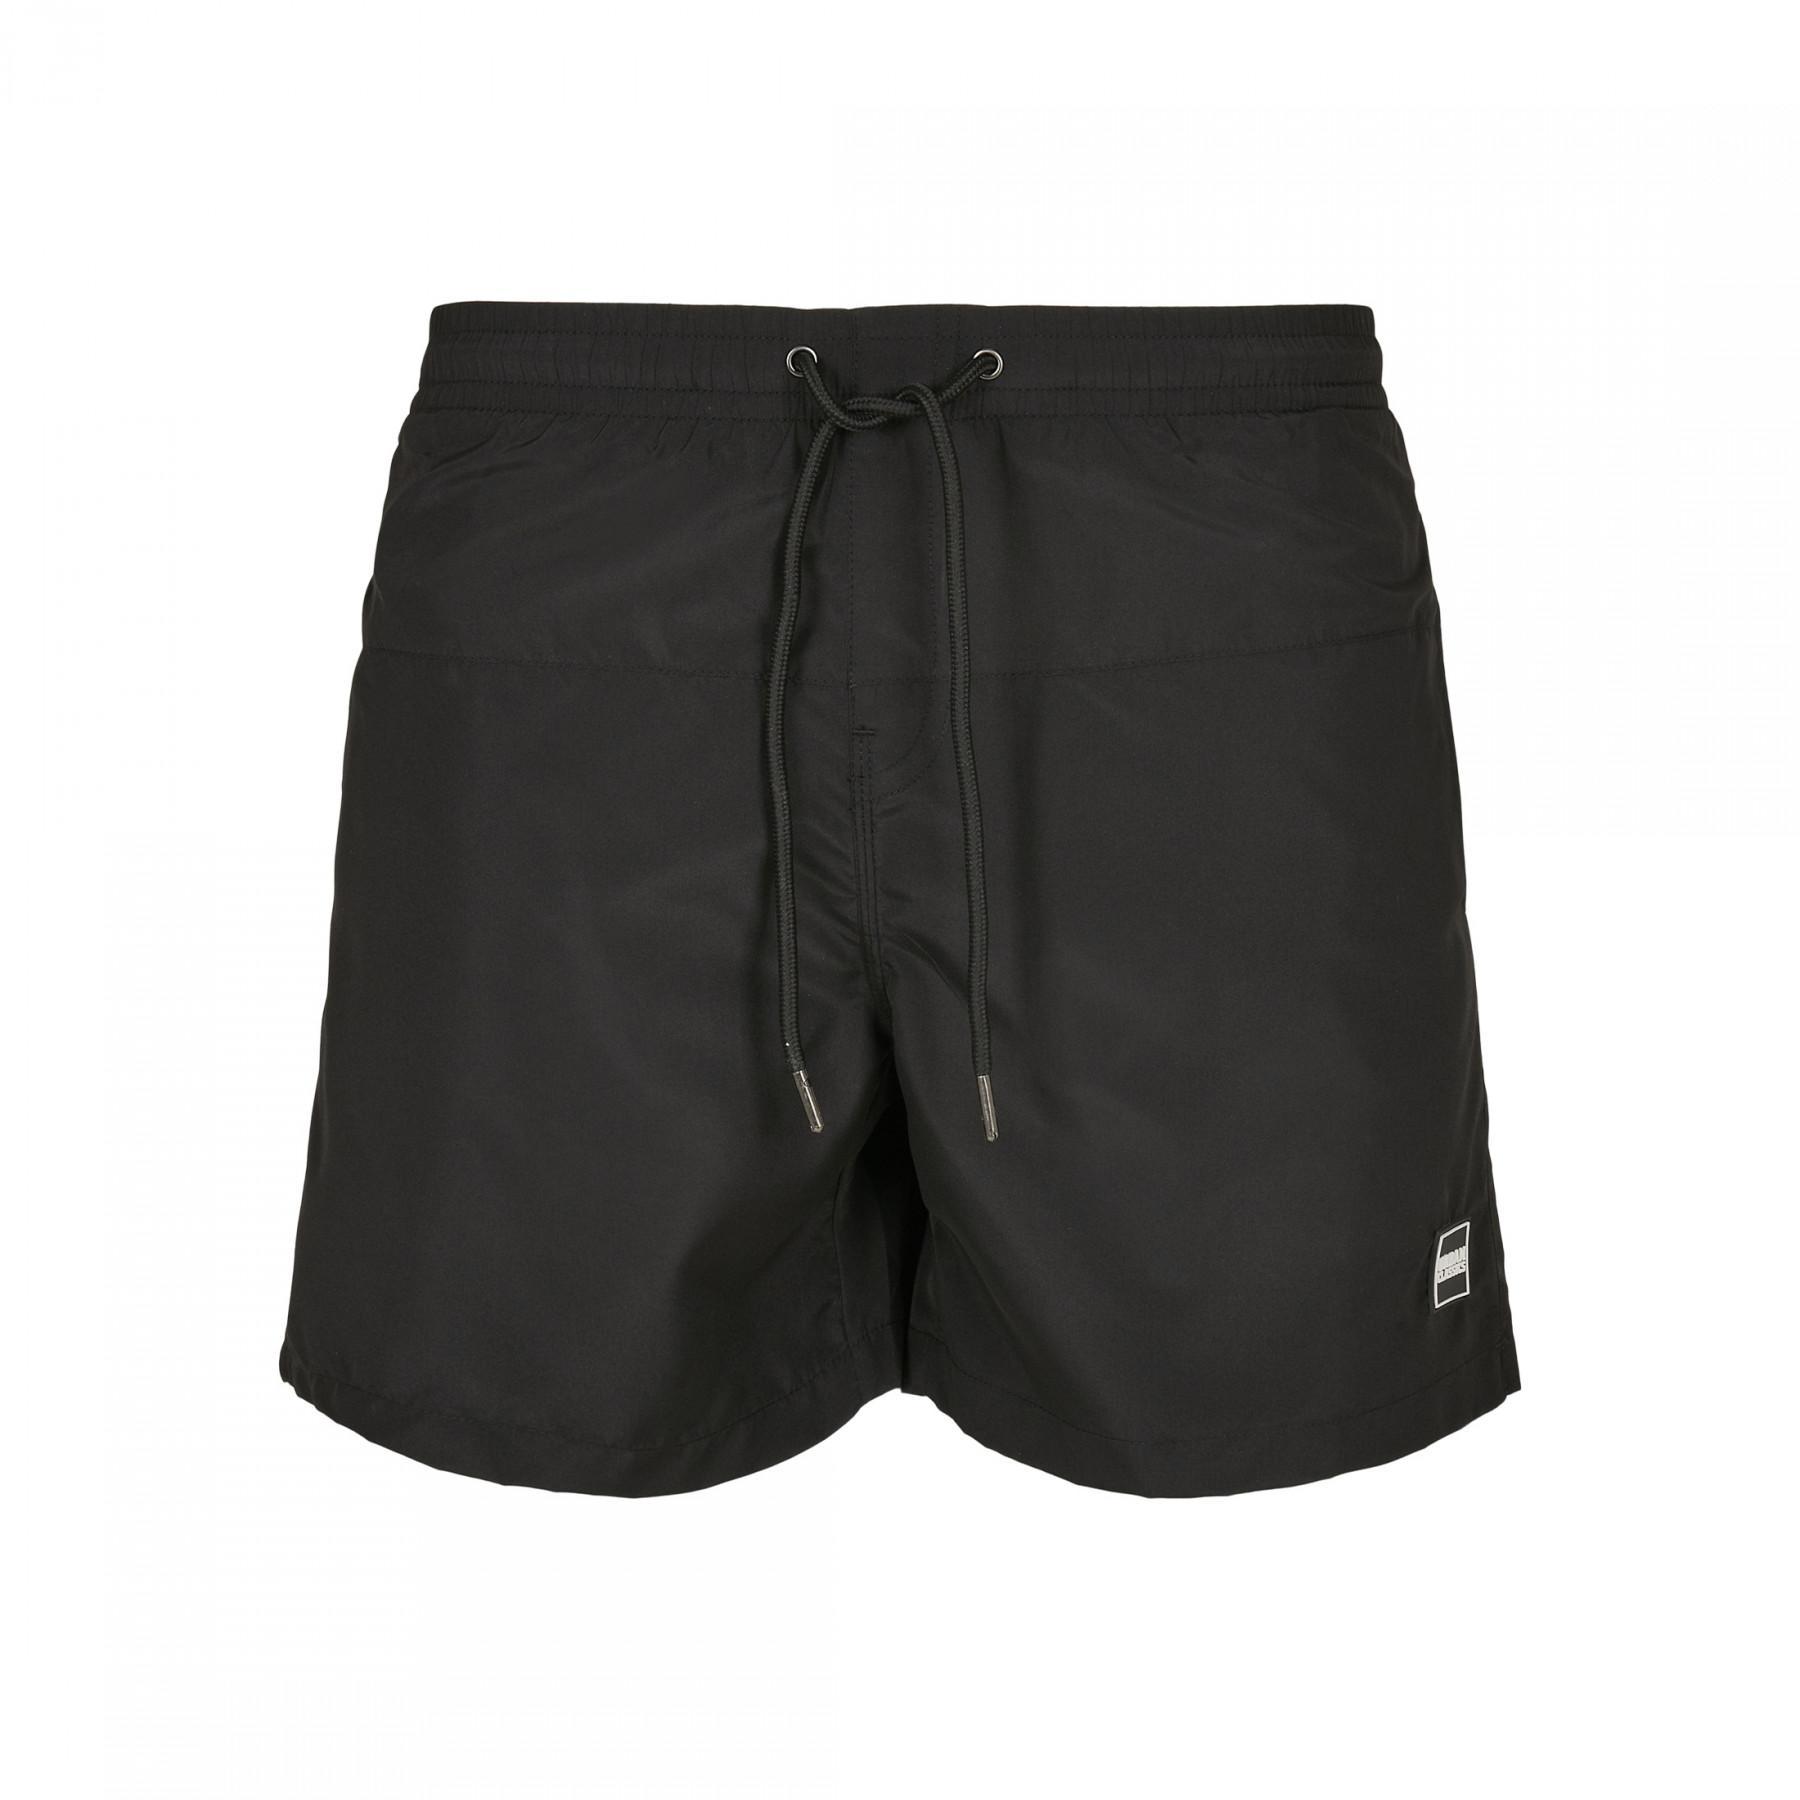 Badehose Urban Classics recyclable